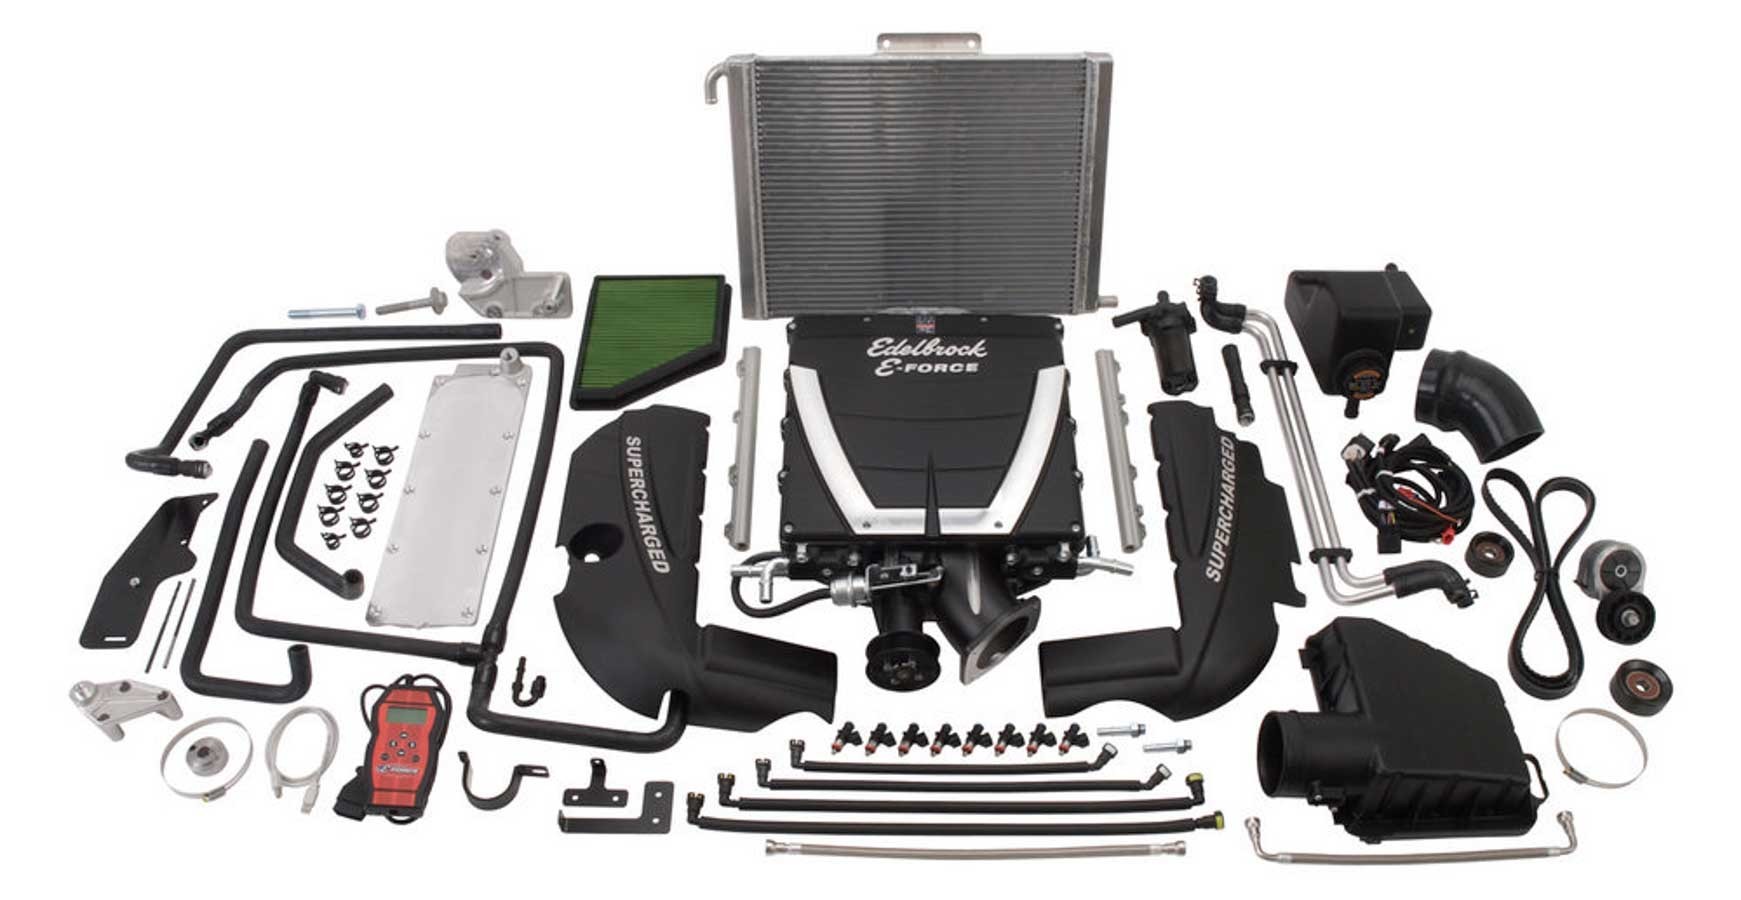 Camaro 2010-13, Supercharger System, E-Force, TVS, Programmer, Black Powder Coat, Automatic Trans, GM LS-Series, SS